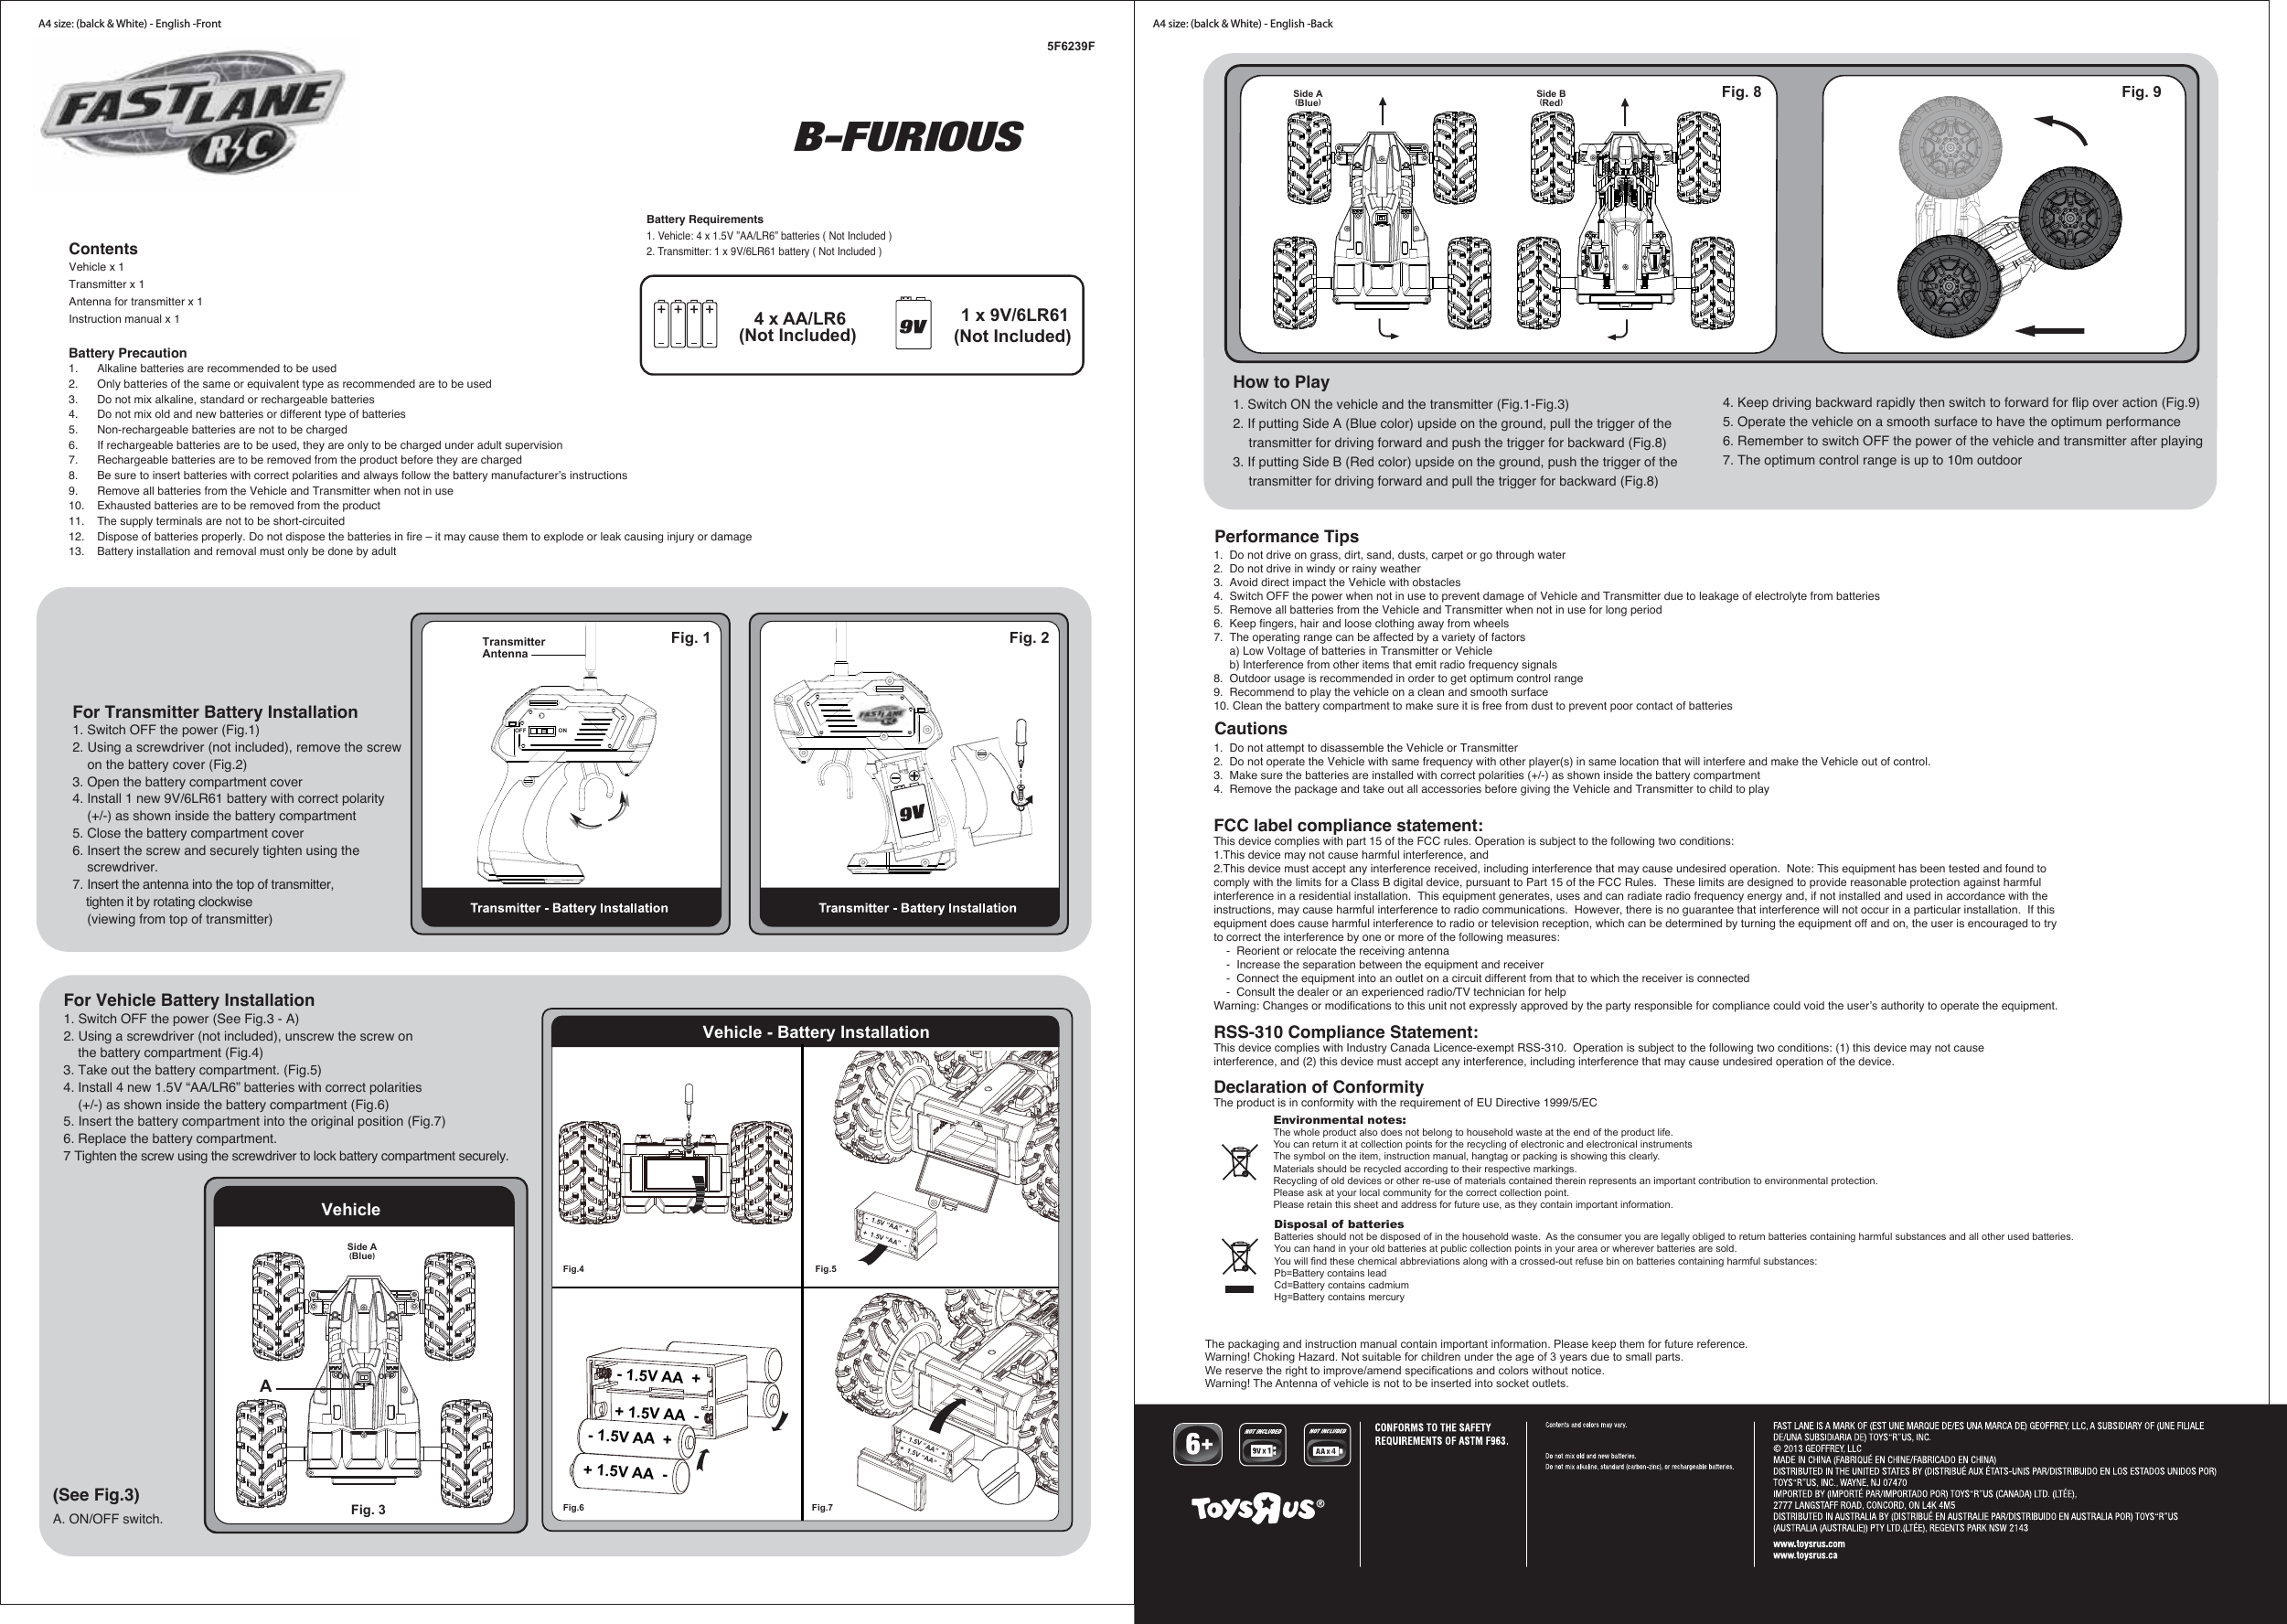 B-FURIOUSThe packaging and instruction manual contain important information. Please keep them for future reference.Warning! Choking Hazard. Not suitable for children under the age of 3 years due to small parts.We reserve the right to improve/amend specifications and colors without notice.Warning! The Antenna of vehicle is not to be inserted into socket outlets.Fig. 2Fig. 9Fig. 8For Transmitter Battery Installation1. Switch OFF the power (Fig.1)2. Using a screwdriver (not included), remove the screw    on the battery cover (Fig.2)3. Open the battery compartment cover4. Install 1 new 9V/6LR61 battery with correct polarity     (+/-) as shown inside the battery compartment5. Close the battery compartment cover6. Insert the screw and securely tighten using the     screwdriver.7. Insert the antenna into the top of transmitter,     tighten it by rotating clockwise    (viewing from top of transmitter)     How to Play1.  Do not drive on grass, dirt, sand, dusts, carpet or go through water2.  Do not drive in windy or rainy weather3.  Avoid direct impact the Vehicle with obstacles4.  Switch OFF the power when not in use to prevent damage of Vehicle and Transmitter due to leakage of electrolyte from batteries5.  Remove all batteries from the Vehicle and Transmitter when not in use for long period6.  Keep fingers, hair and loose clothing away from wheels7.  The operating range can be affected by a variety of factors     a) Low Voltage of batteries in Transmitter or Vehicle     b) Interference from other items that emit radio frequency signals8.  Outdoor usage is recommended in order to get optimum control range9.  Recommend to play the vehicle on a clean and smooth surface10. Clean the battery compartment to make sure it is free from dust to prevent poor contact of batteries Performance Tips1.  Do not attempt to disassemble the Vehicle or Transmitter2.  Do not operate the Vehicle with same frequency with other player(s) in same location that will interfere and make the Vehicle out of control.3.  Make sure the batteries are installed with correct polarities (+/-) as shown inside the battery compartment4.  Remove the package and take out all accessories before giving the Vehicle and Transmitter to child to playCautionsEnvironmental notes:The whole product also does not belong to household waste at the end of the product life.You can return it at collection points for the recycling of electronic and electronical instrumentsThe symbol on the item, instruction manual, hangtag or packing is showing this clearly.Materials should be recycled according to their respective markings.Recycling of old devices or other re-use of materials contained therein represents an important contribution to environmental protection.Please ask at your local community for the correct collection point.Please retain this sheet and address for future use, as they contain important information.1. Switch ON the vehicle and the transmitter (Fig.1-Fig.3)2. If putting Side A (Blue color) upside on the ground, pull the trigger of the   transmitter for driving forward and push the trigger for backward (Fig.8)3. If putting Side B (Red color) upside on the ground, push the trigger of the   transmitter for driving forward and pull the trigger for backward (Fig.8)ContentsVehicle x 1Transmitter x 1Antenna for transmitter x 1Instruction manual x 1  Battery Requirements1. Vehicle: 4 x 1.5V ”AA/LR6” batteries ( Not Included )2. Transmitter: 1 x 9V/6LR61 battery ( Not Included )4 x AA/LR6(Not Included) 1 x 9V/6LR61(Not Included) 4Disposal of batteriesBatteries should not be disposed of in the household waste.  As the consumer you are legally obliged to return batteries containing harmful substances and all other used batteries.  You can hand in your old batteries at public collection points in your area or wherever batteries are sold.You will find these chemical abbreviations along with a crossed-out refuse bin on batteries containing harmful substances:Pb=Battery contains leadCd=Battery contains cadmiumHg=Battery contains mercuryA4 size: (balck &amp; White) - English -Front A4 size: (balck &amp; White) - English -Back 5F6239FFCC label compliance statement:This device complies with part 15 of the FCC rules. Operation is subject to the following two conditions:1.This device may not cause harmful interference, and 2.This device must accept any interference received, including interference that may cause undesired operation.  Note: This equipment has been tested and found to comply with the limits for a Class B digital device, pursuant to Part 15 of the FCC Rules.  These limits are designed to provide reasonable protection against harmful interference in a residential installation.  This equipment generates, uses and can radiate radio frequency energy and, if not installed and used in accordance with the instructions, may cause harmful interference to radio communications.  However, there is no guarantee that interference will not occur in a particular installation.  If this equipment does cause harmful interference to radio or television reception, which can be determined by turning the equipment off and on, the user is encouraged to try to correct the interference by one or more of the following measures:    -  Reorient or relocate the receiving antenna    -  Increase the separation between the equipment and receiver    -  Connect the equipment into an outlet on a circuit different from that to which the receiver is connected    -  Consult the dealer or an experienced radio/TV technician for helpWarning: Changes or modifications to this unit not expressly approved by the party responsible for compliance could void the user’s authority to operate the equipment.RSS-310 Compliance Statement:This device complies with Industry Canada Licence-exempt RSS-310.  Operation is subject to the following two conditions: (1) this device may not cause interference, and (2) this device must accept any interference, including interference that may cause undesired operation of the device.Declaration of ConformityThe product is in conformity with the requirement of EU Directive 1999/5/ECBattery Precaution1.  Alkaline batteries are recommended to be used2.  Only batteries of the same or equivalent type as recommended are to be used3.  Do not mix alkaline, standard or rechargeable batteries4.  Do not mix old and new batteries or different type of batteries5.  Non-rechargeable batteries are not to be charged6.  If rechargeable batteries are to be used, they are only to be charged under adult supervision7.  Rechargeable batteries are to be removed from the product before they are charged8.  Be sure to insert batteries with correct polarities and always follow the battery manufacturer’s instructions9.  Remove all batteries from the Vehicle and Transmitter when not in use10.  Exhausted batteries are to be removed from the product11.  The supply terminals are not to be short-circuited12.  Dispose of batteries properly. Do not dispose the batteries in fire – it may cause them to explode or leak causing injury or damage13.  Battery installation and removal must only be done by adult(See Fig.3) A. ON/OFF switch.For Vehicle Battery Installation1. Switch OFF the power (See Fig.3 - A)2. Using a screwdriver (not included), unscrew the screw on     the battery compartment (Fig.4)3. Take out the battery compartment. (Fig.5)4. Install 4 new 1.5V “AA/LR6” batteries with correct polarities     (+/-) as shown inside the battery compartment (Fig.6)5. Insert the battery compartment into the original position (Fig.7)6. Replace the battery compartment.7 Tighten the screw using the screwdriver to lock battery compartment securely.Vehicle - Battery Installation-  1.5V “AA”  ++  1.5V “AA”  --  1.5V “AA”  ++  1.5V “AA”  -+ 1.5V AA  -- 1.5V AA  ++ 1.5V AA  -- 1.5V AA  +Fig.4 Fig.5Fig.6 Fig.7Fig. 3VehicleON OFFAFig. 1TransmitterAntennaOFF ON4. Keep driving backward rapidly then switch to forward for flip over action (Fig.9)5. Operate the vehicle on a smooth surface to have the optimum performance6. Remember to switch OFF the power of the vehicle and transmitter after playing7. The optimum control range is up to 10m outdoorSide A(Blue)Side B(Red)Side A(Blue)